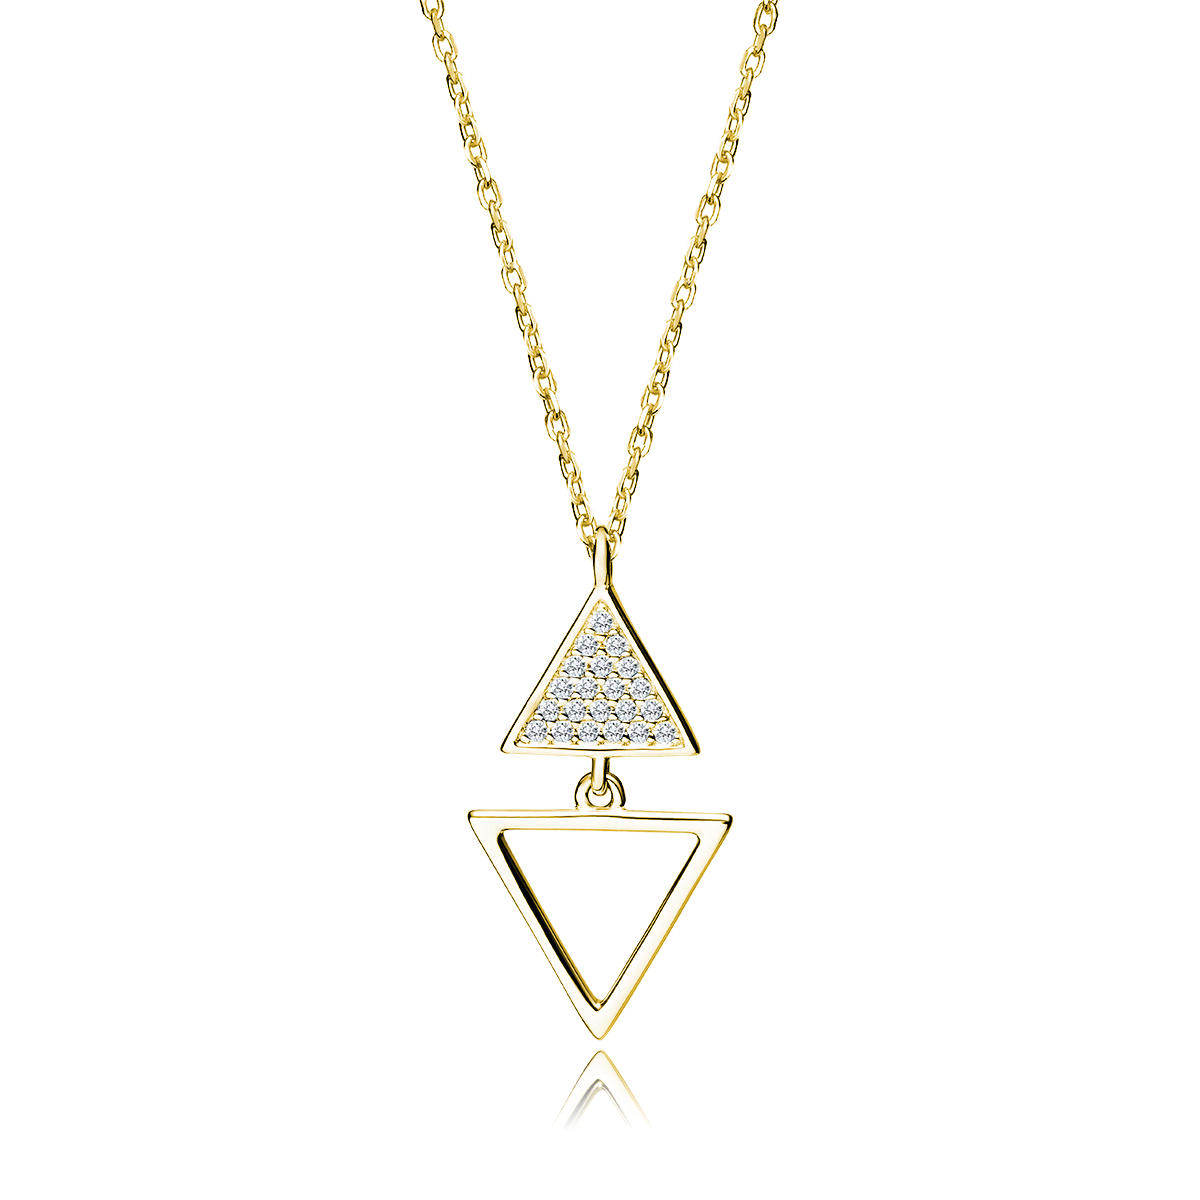 triangles rule necklace–gold plated Κολιέ Triangles Rule Κίτρινο Επιχρυσωμένο Ασήμι 925 - ασήμι 925